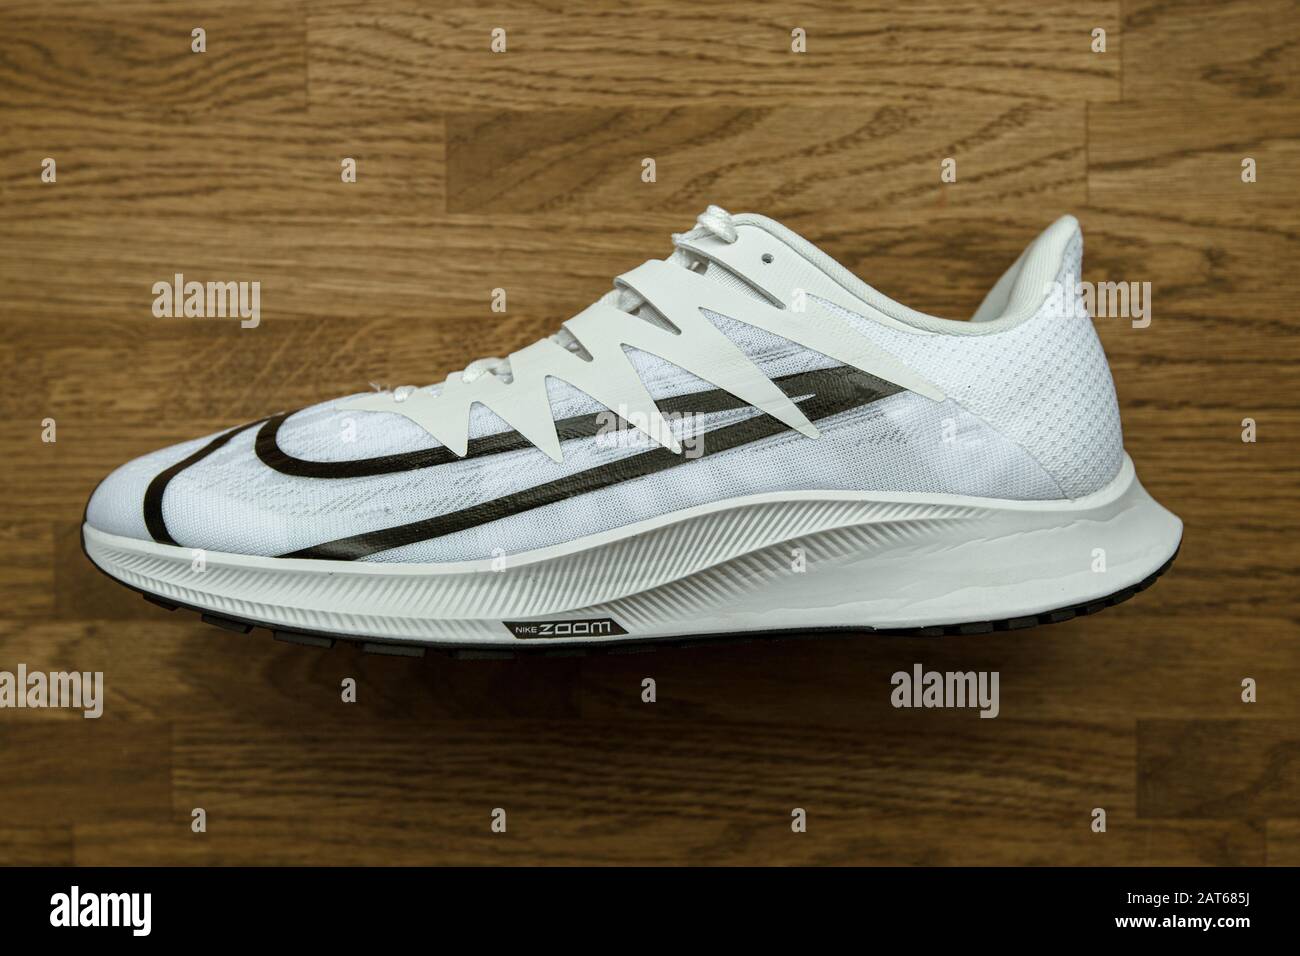 Paris, France - Sep 23, 2019: Overhead view professional running shoe  manufactured by Nike model Zoom Rival Fly for women with black swoosh logo  Stock Photo - Alamy